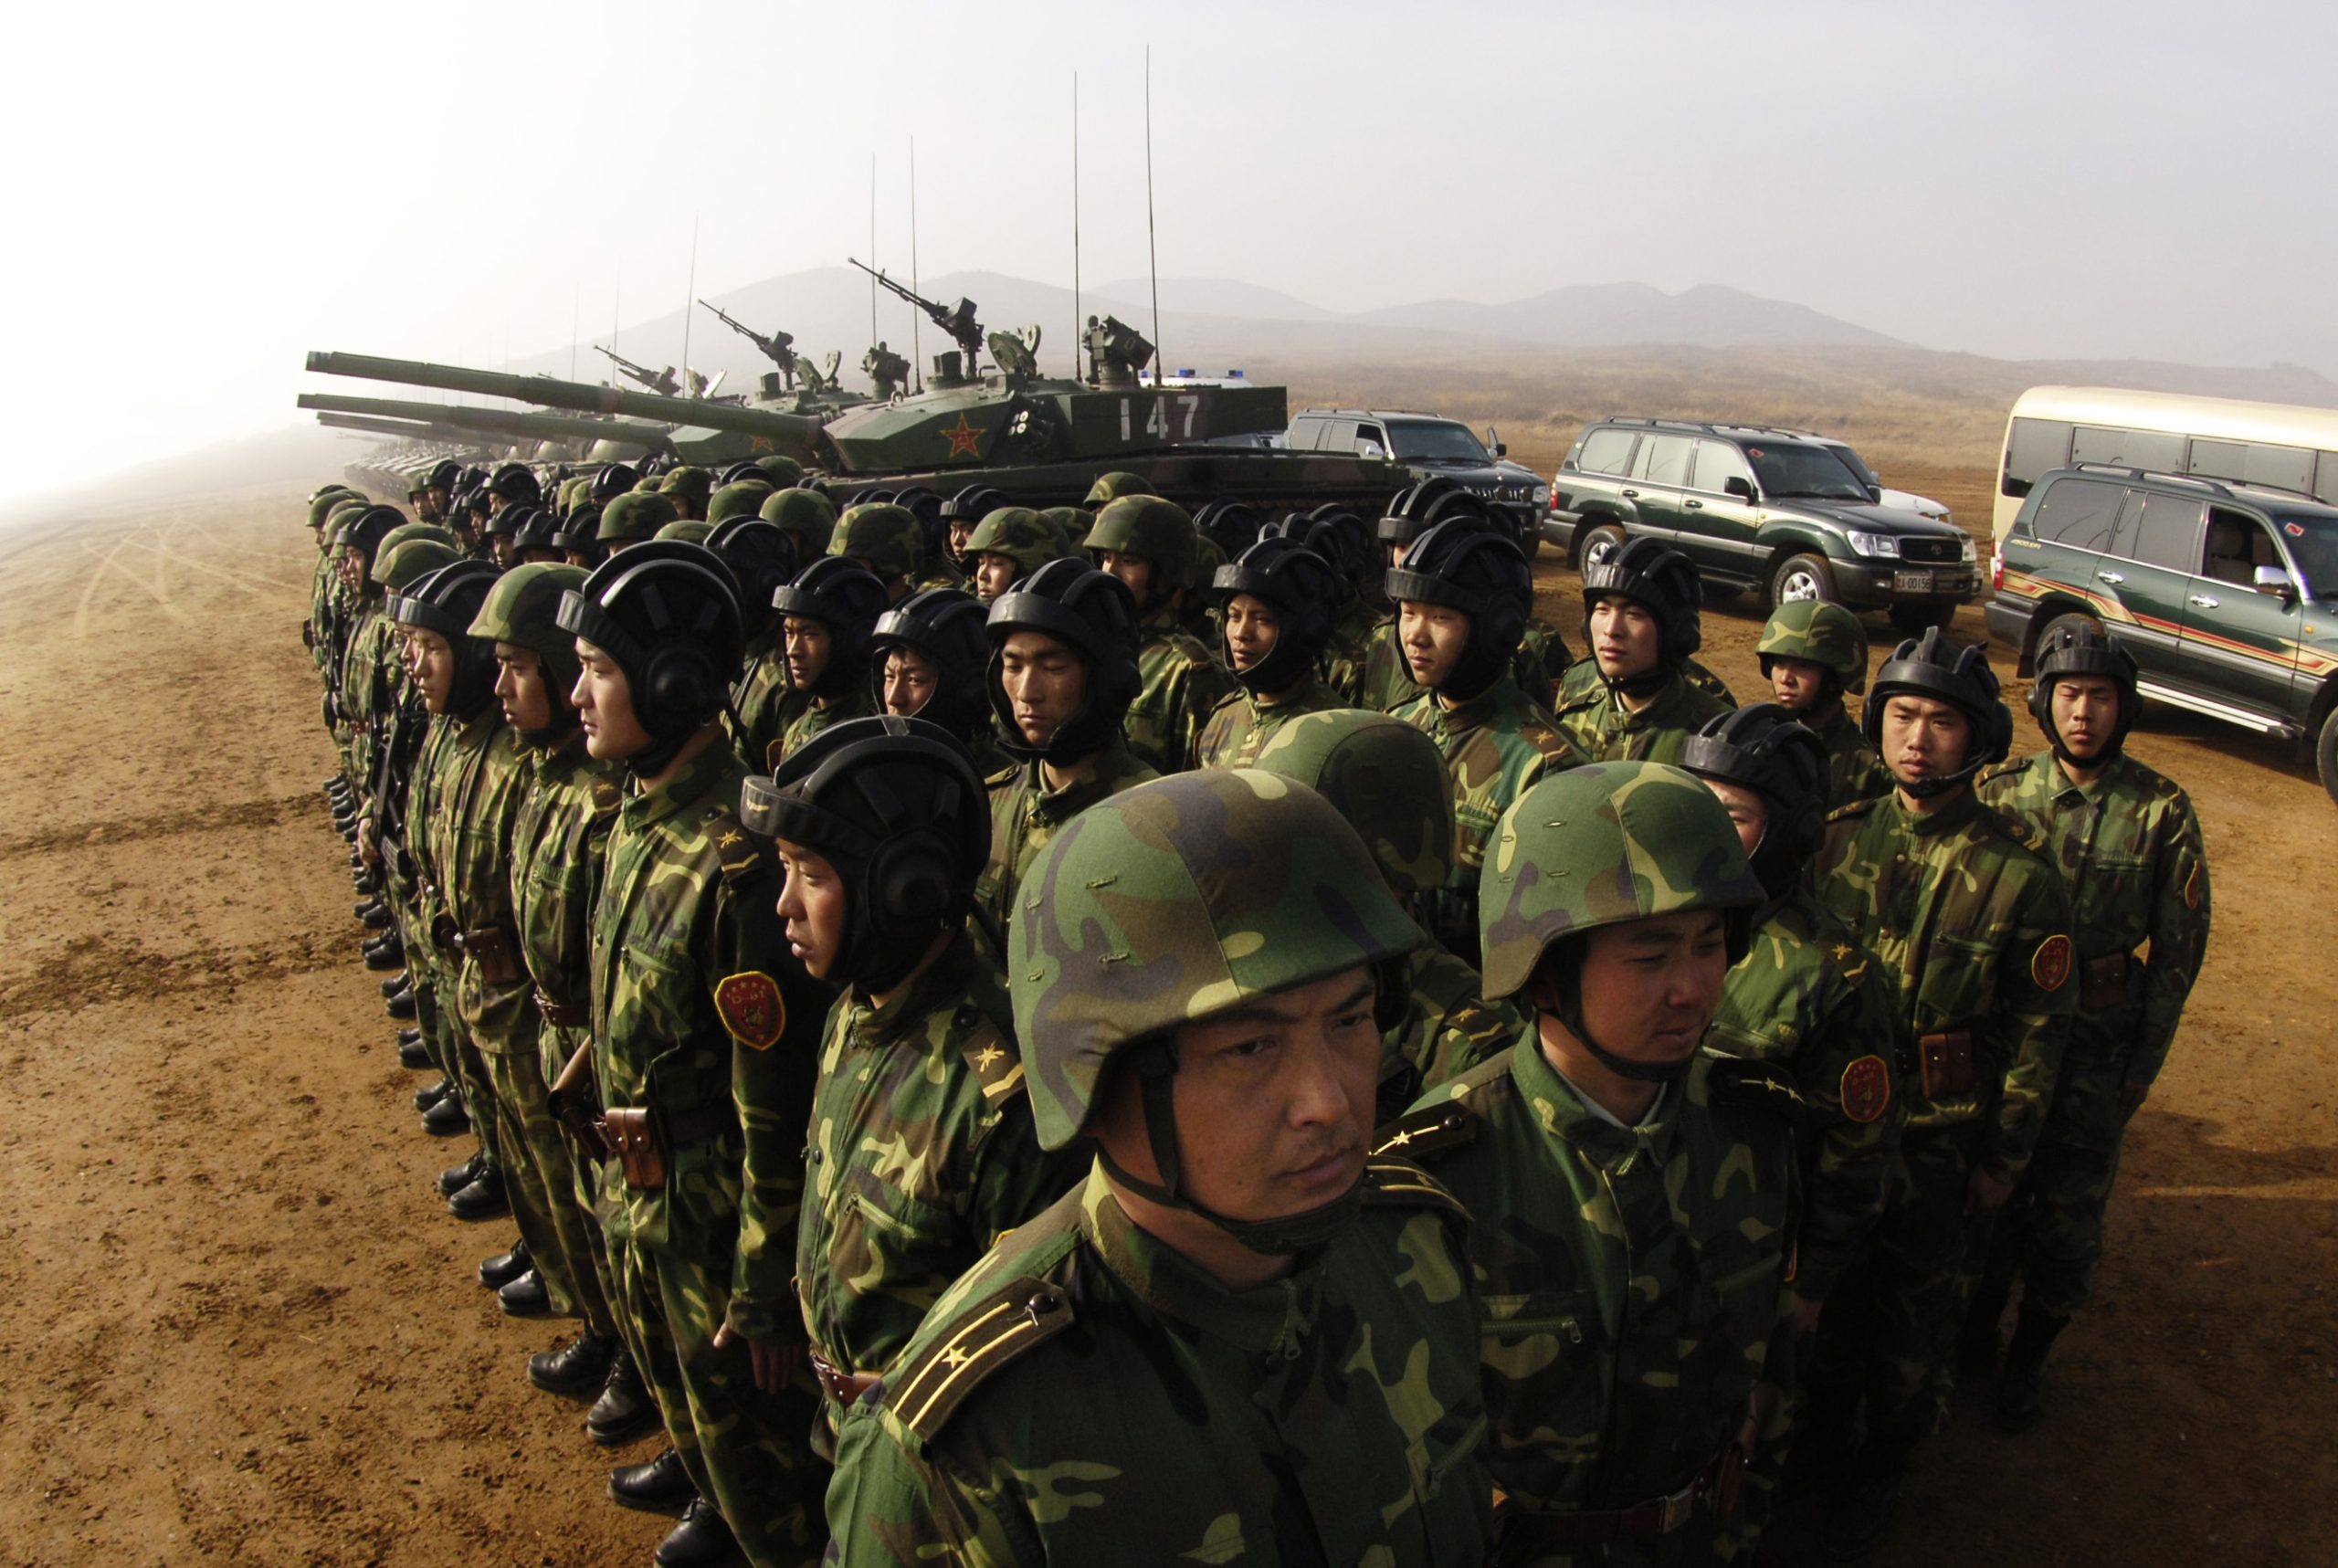 China Updates Conscription Law - "Focus On Preparations For War"